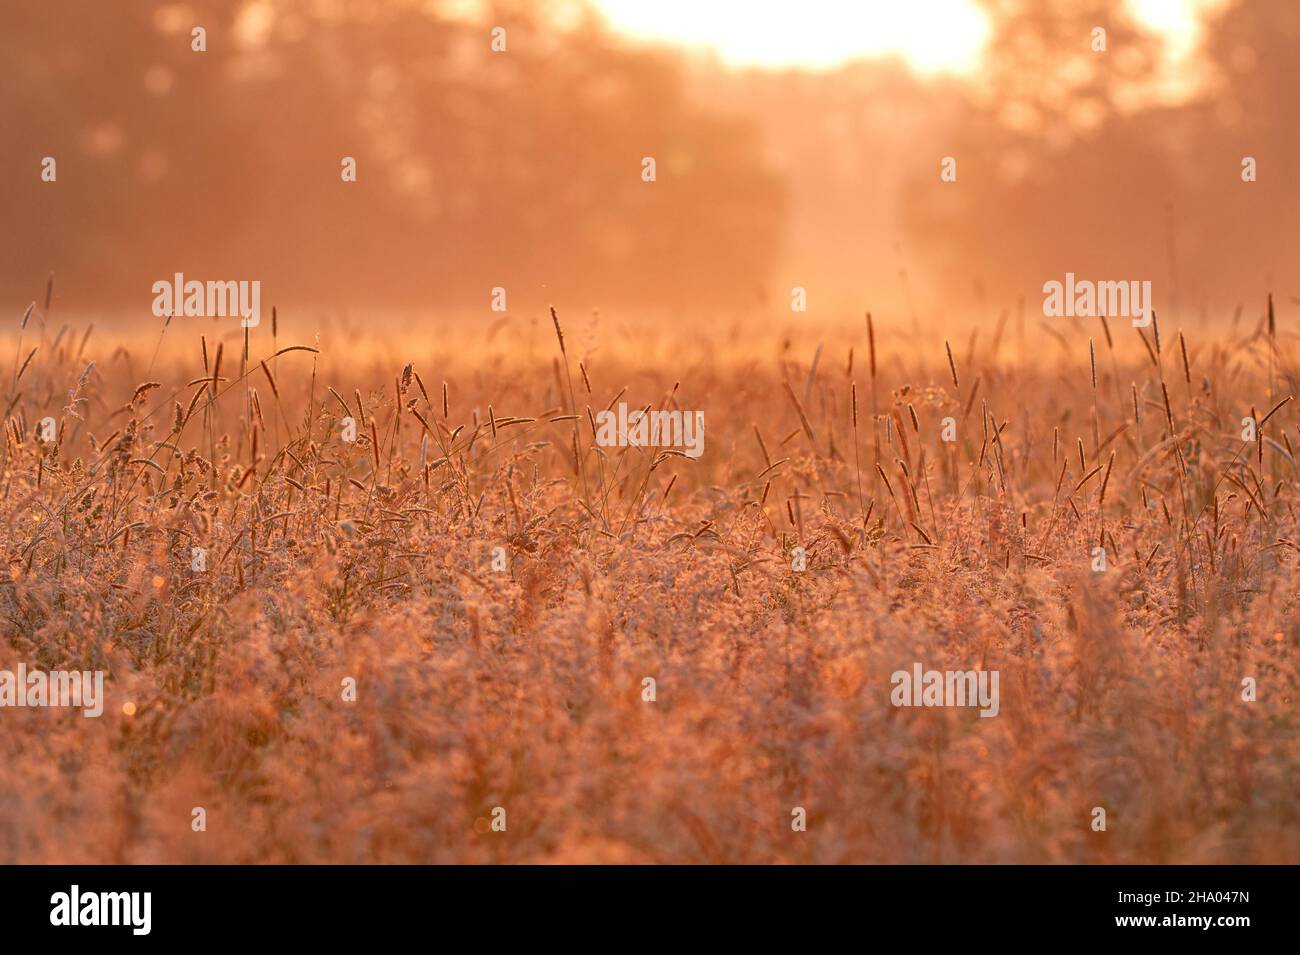 Grassland in warm early summer morning light, natural background Stock Photo